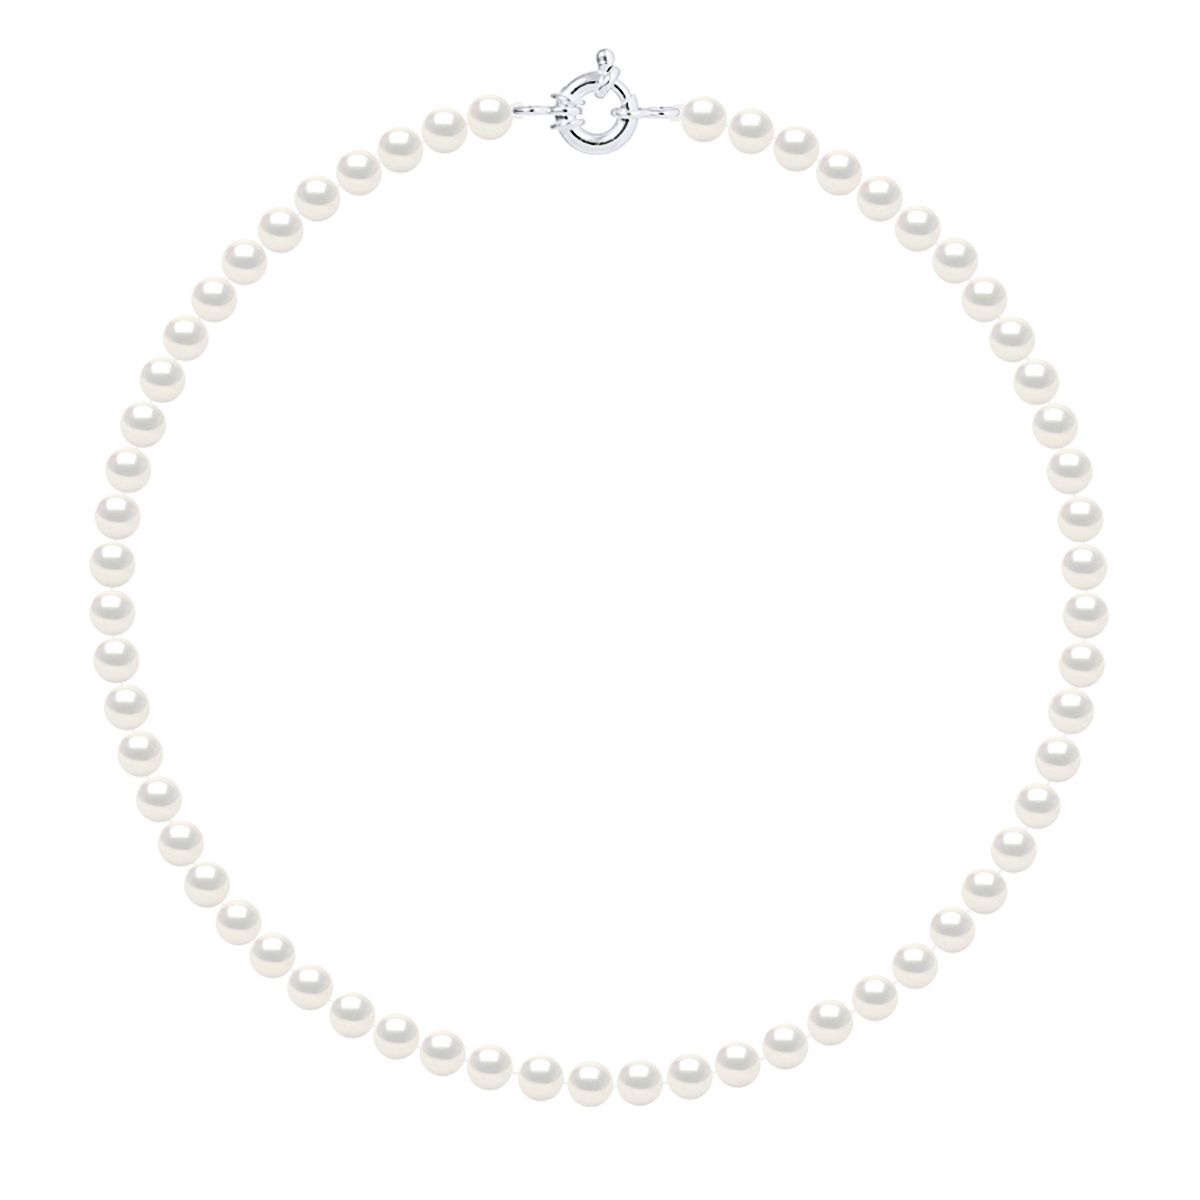 Necklace made with Cultured Freshwater Pearls 6-7 mm - 0,24 in - Natural White Color and Spring Ring 925 Sterling Silver Length 42 cm , 16,5 in - Our jewellery is made in France and will be delivered in a gift box accompanied by a Certificate of Authenticity and International Warranty